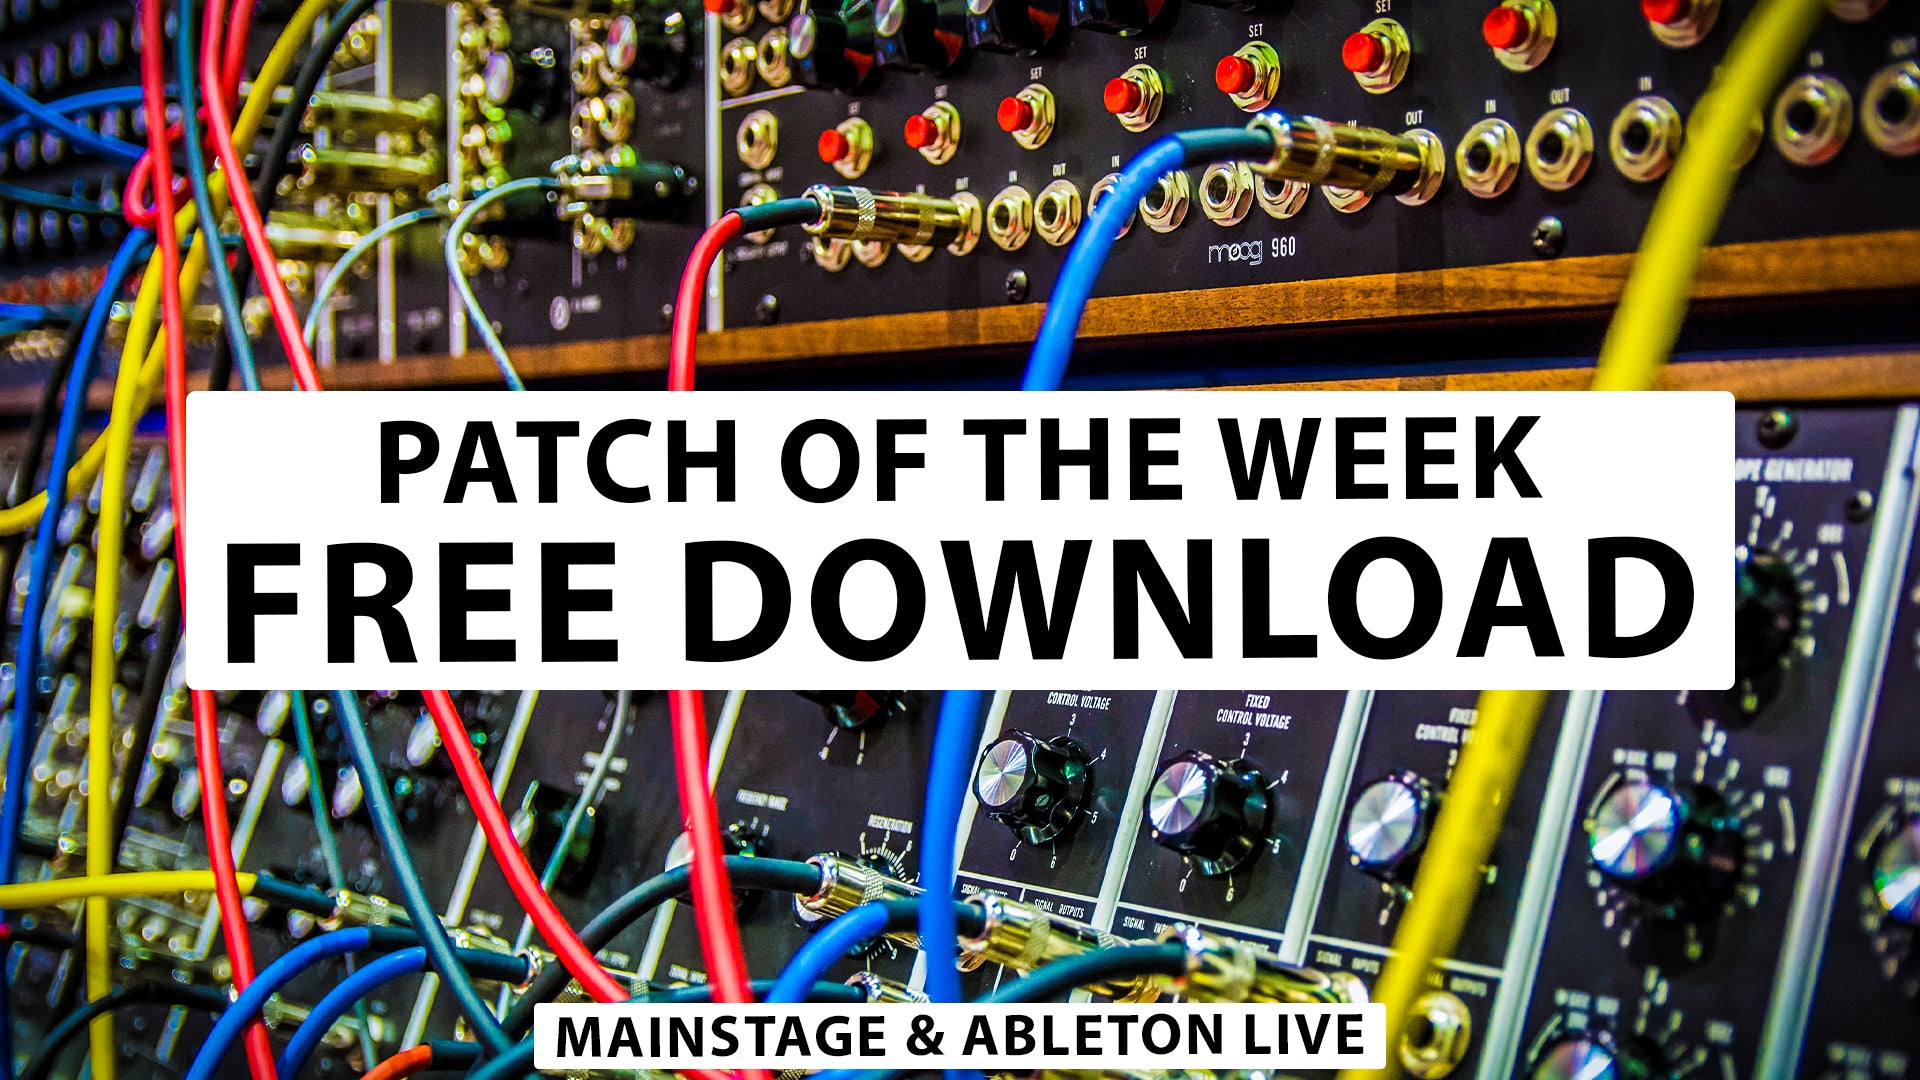 Big Ol Bass - Free MainStage & Ableton Worship Patch!